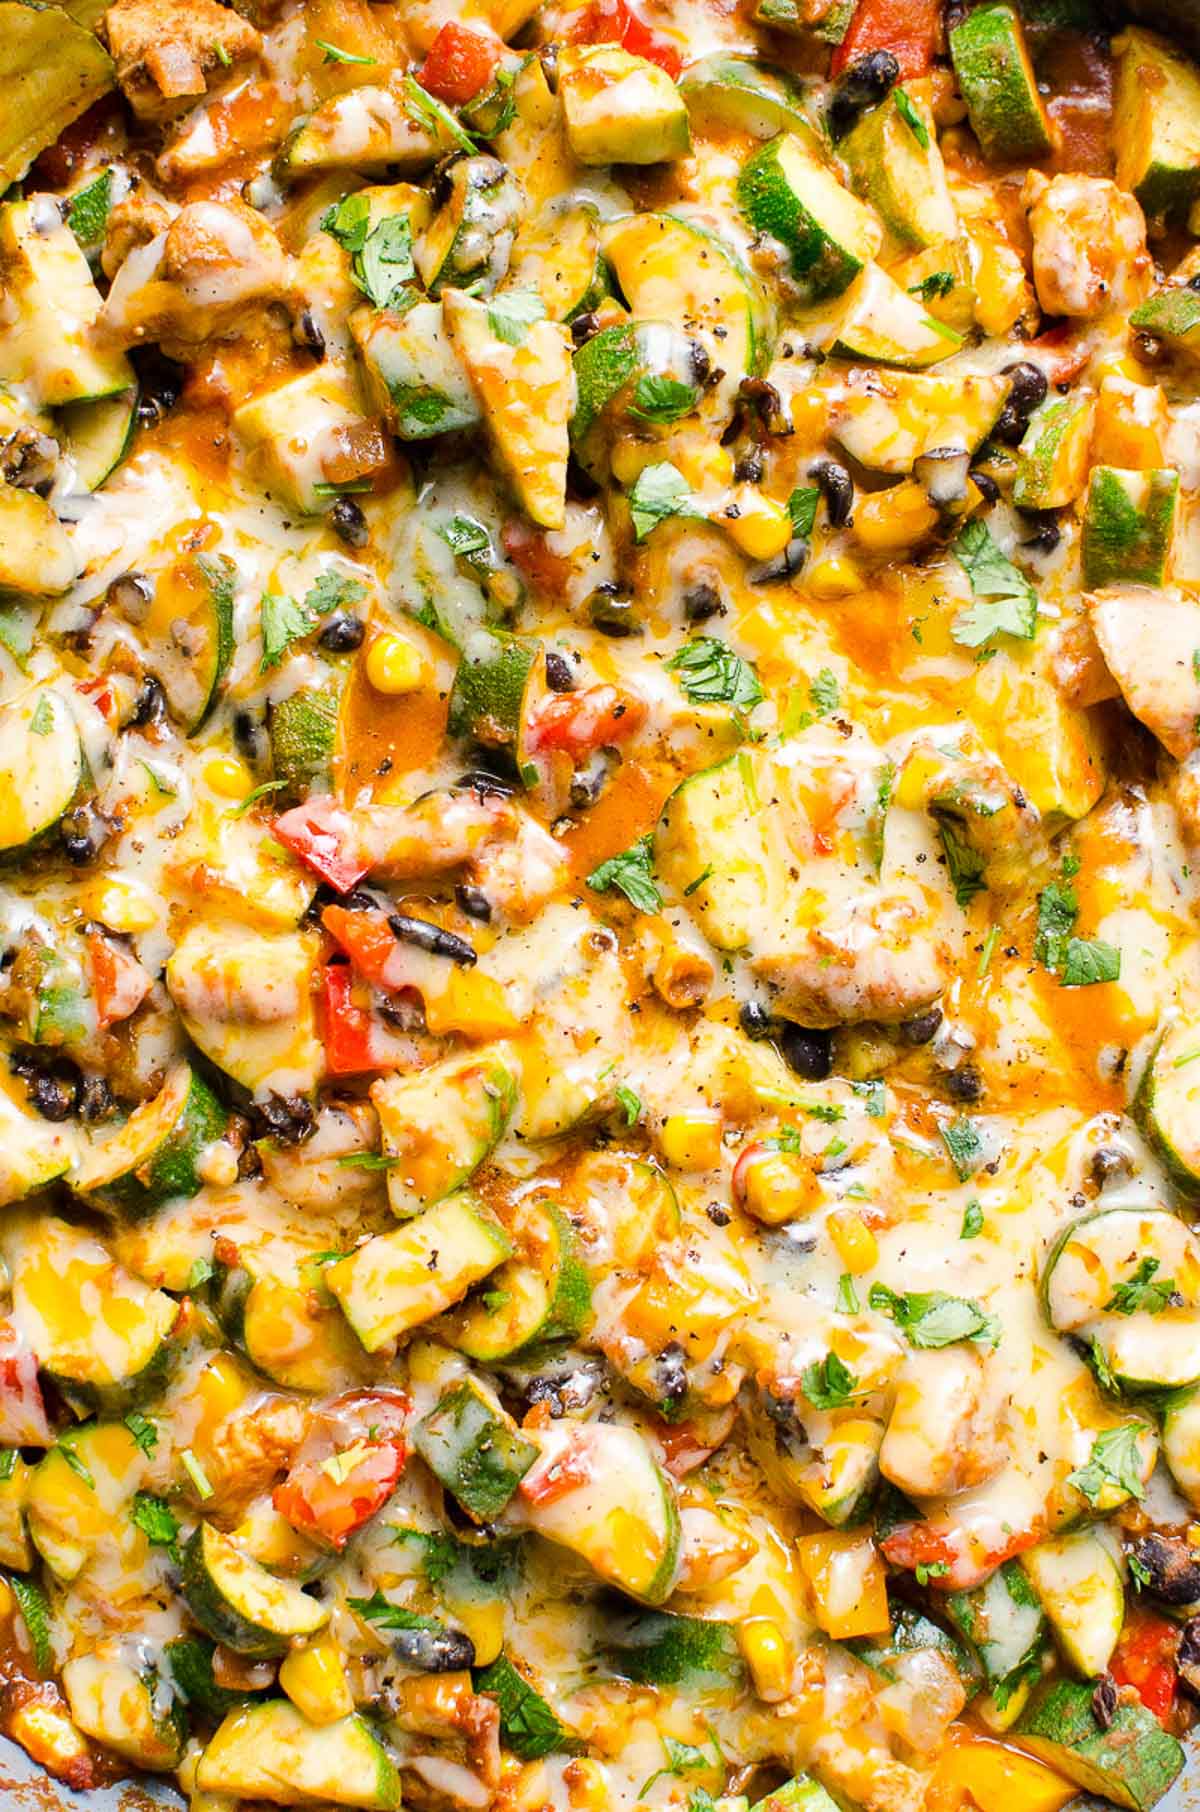 Closeup of Mexican chicken and zucchini with corn and black beans covered in melted cheese.